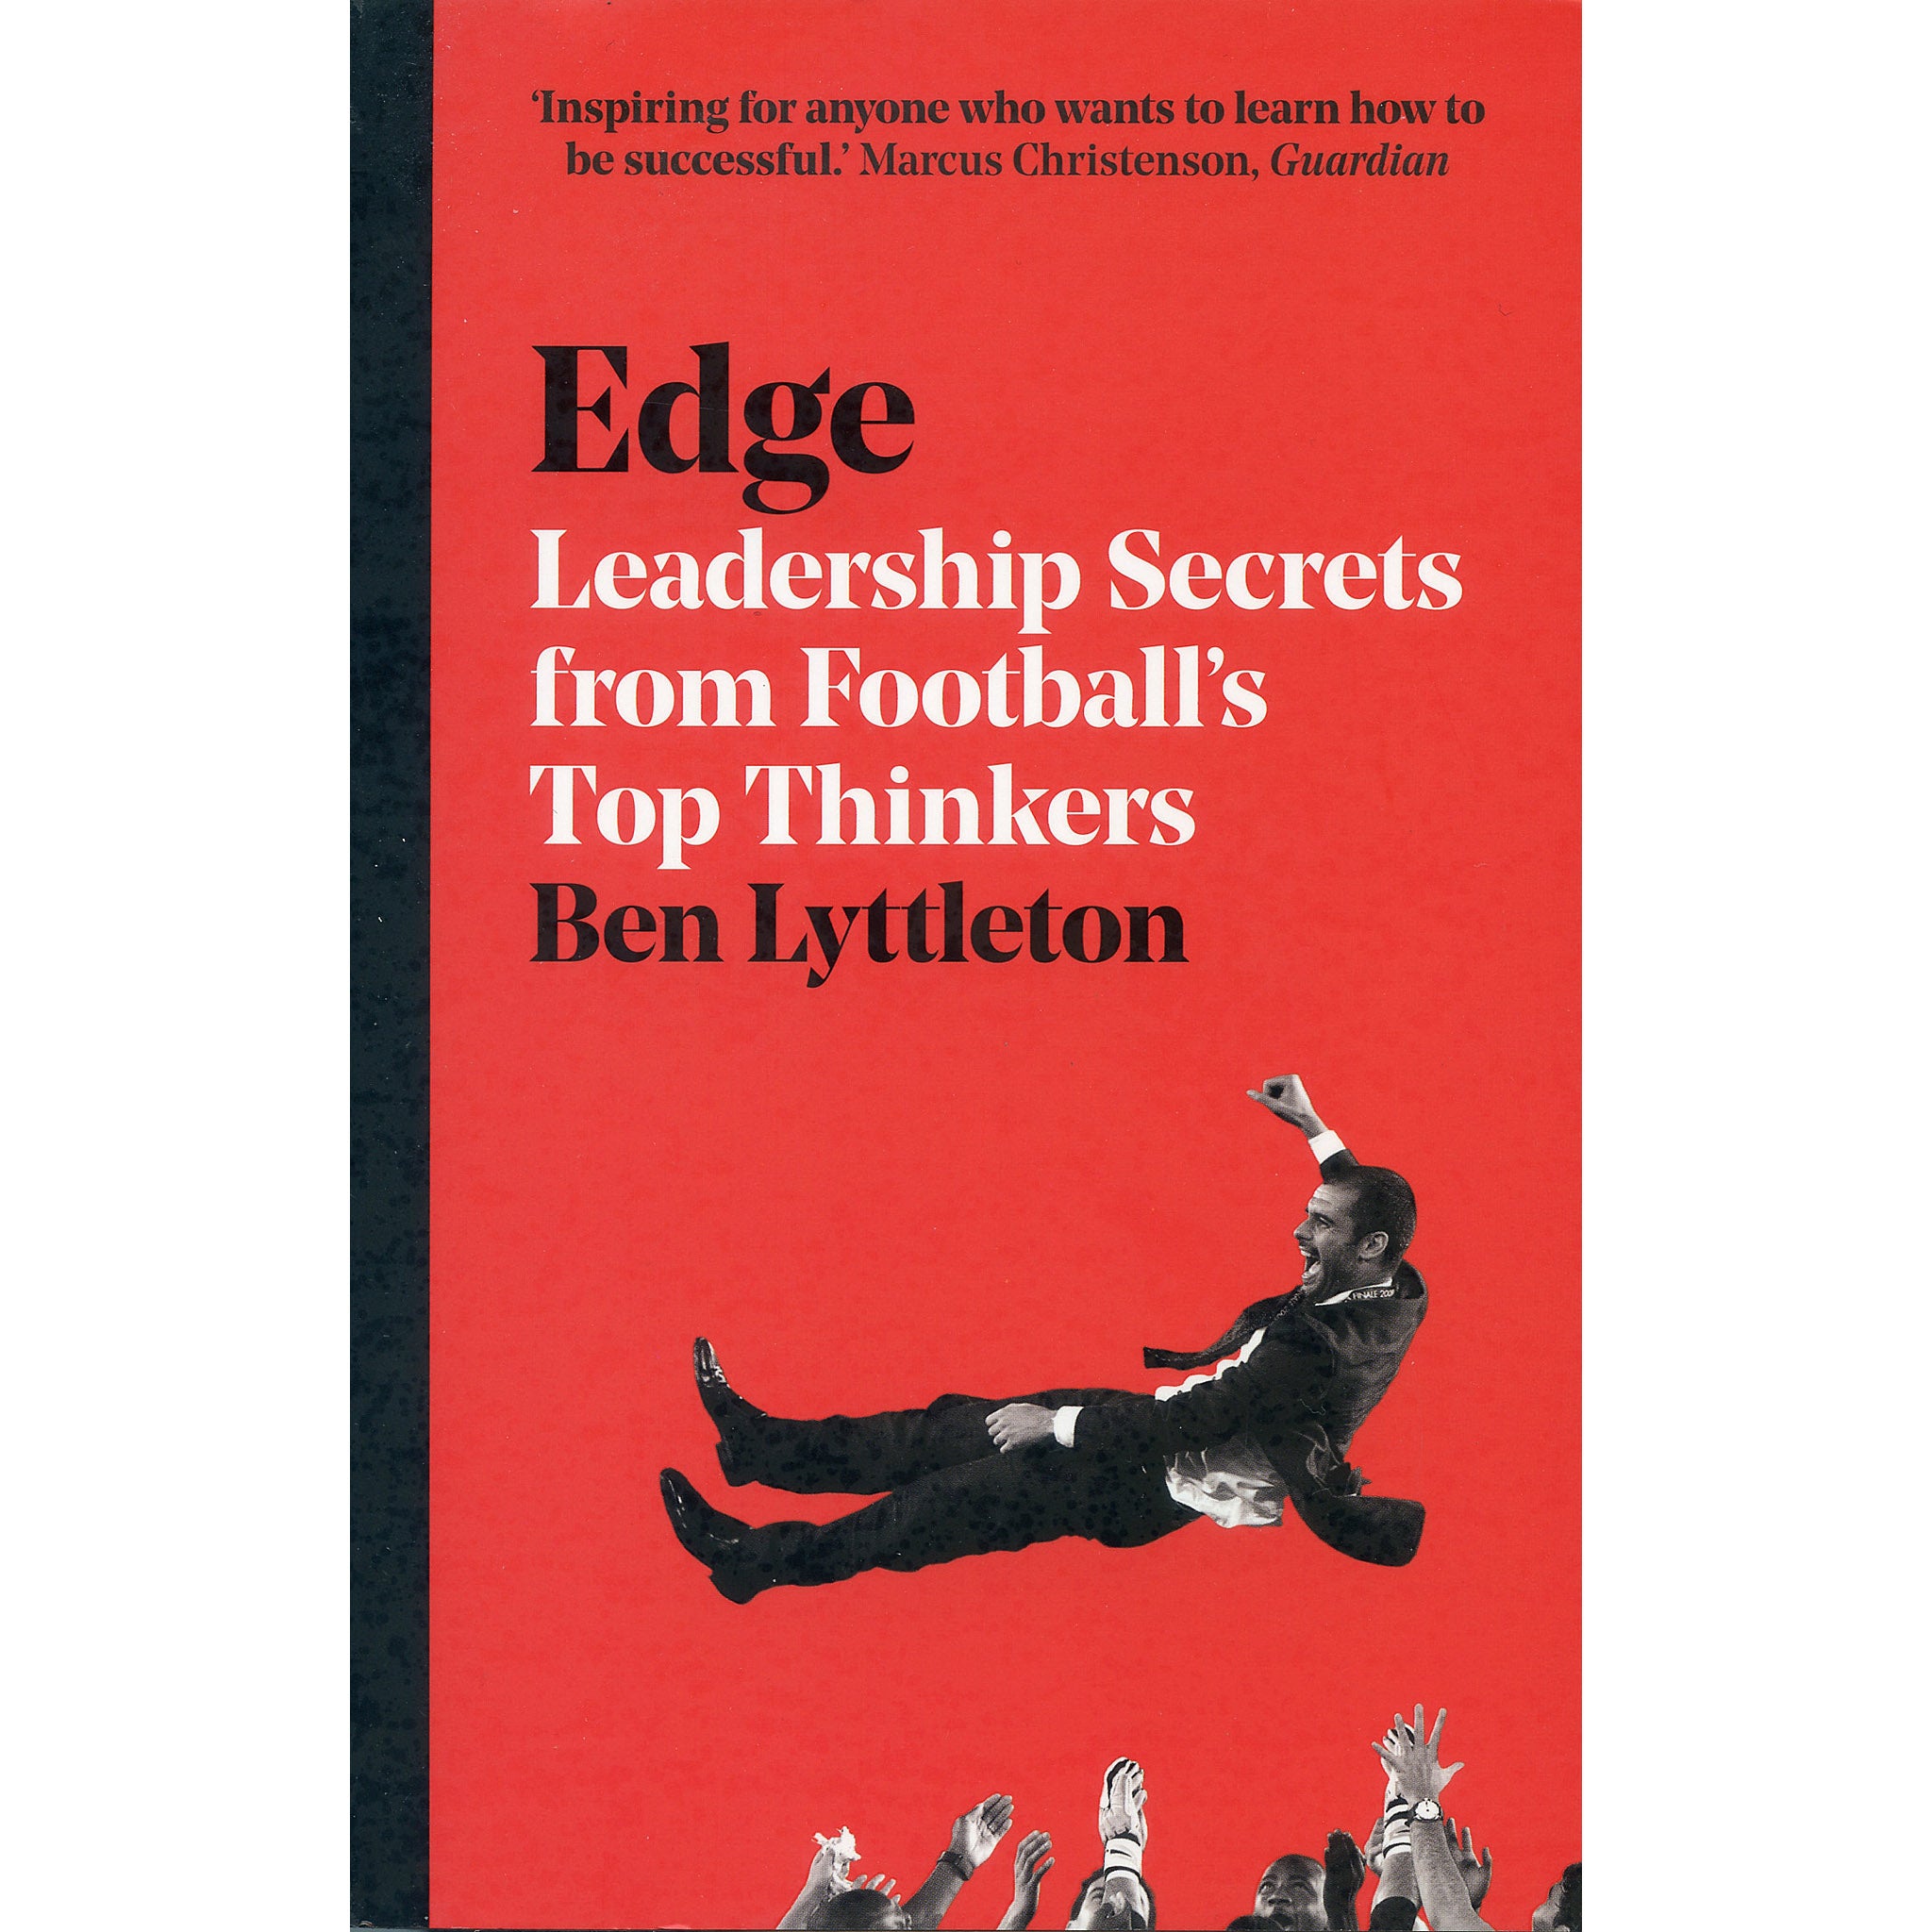 Edge – Leadership Secrets from Football's Top Thinkers